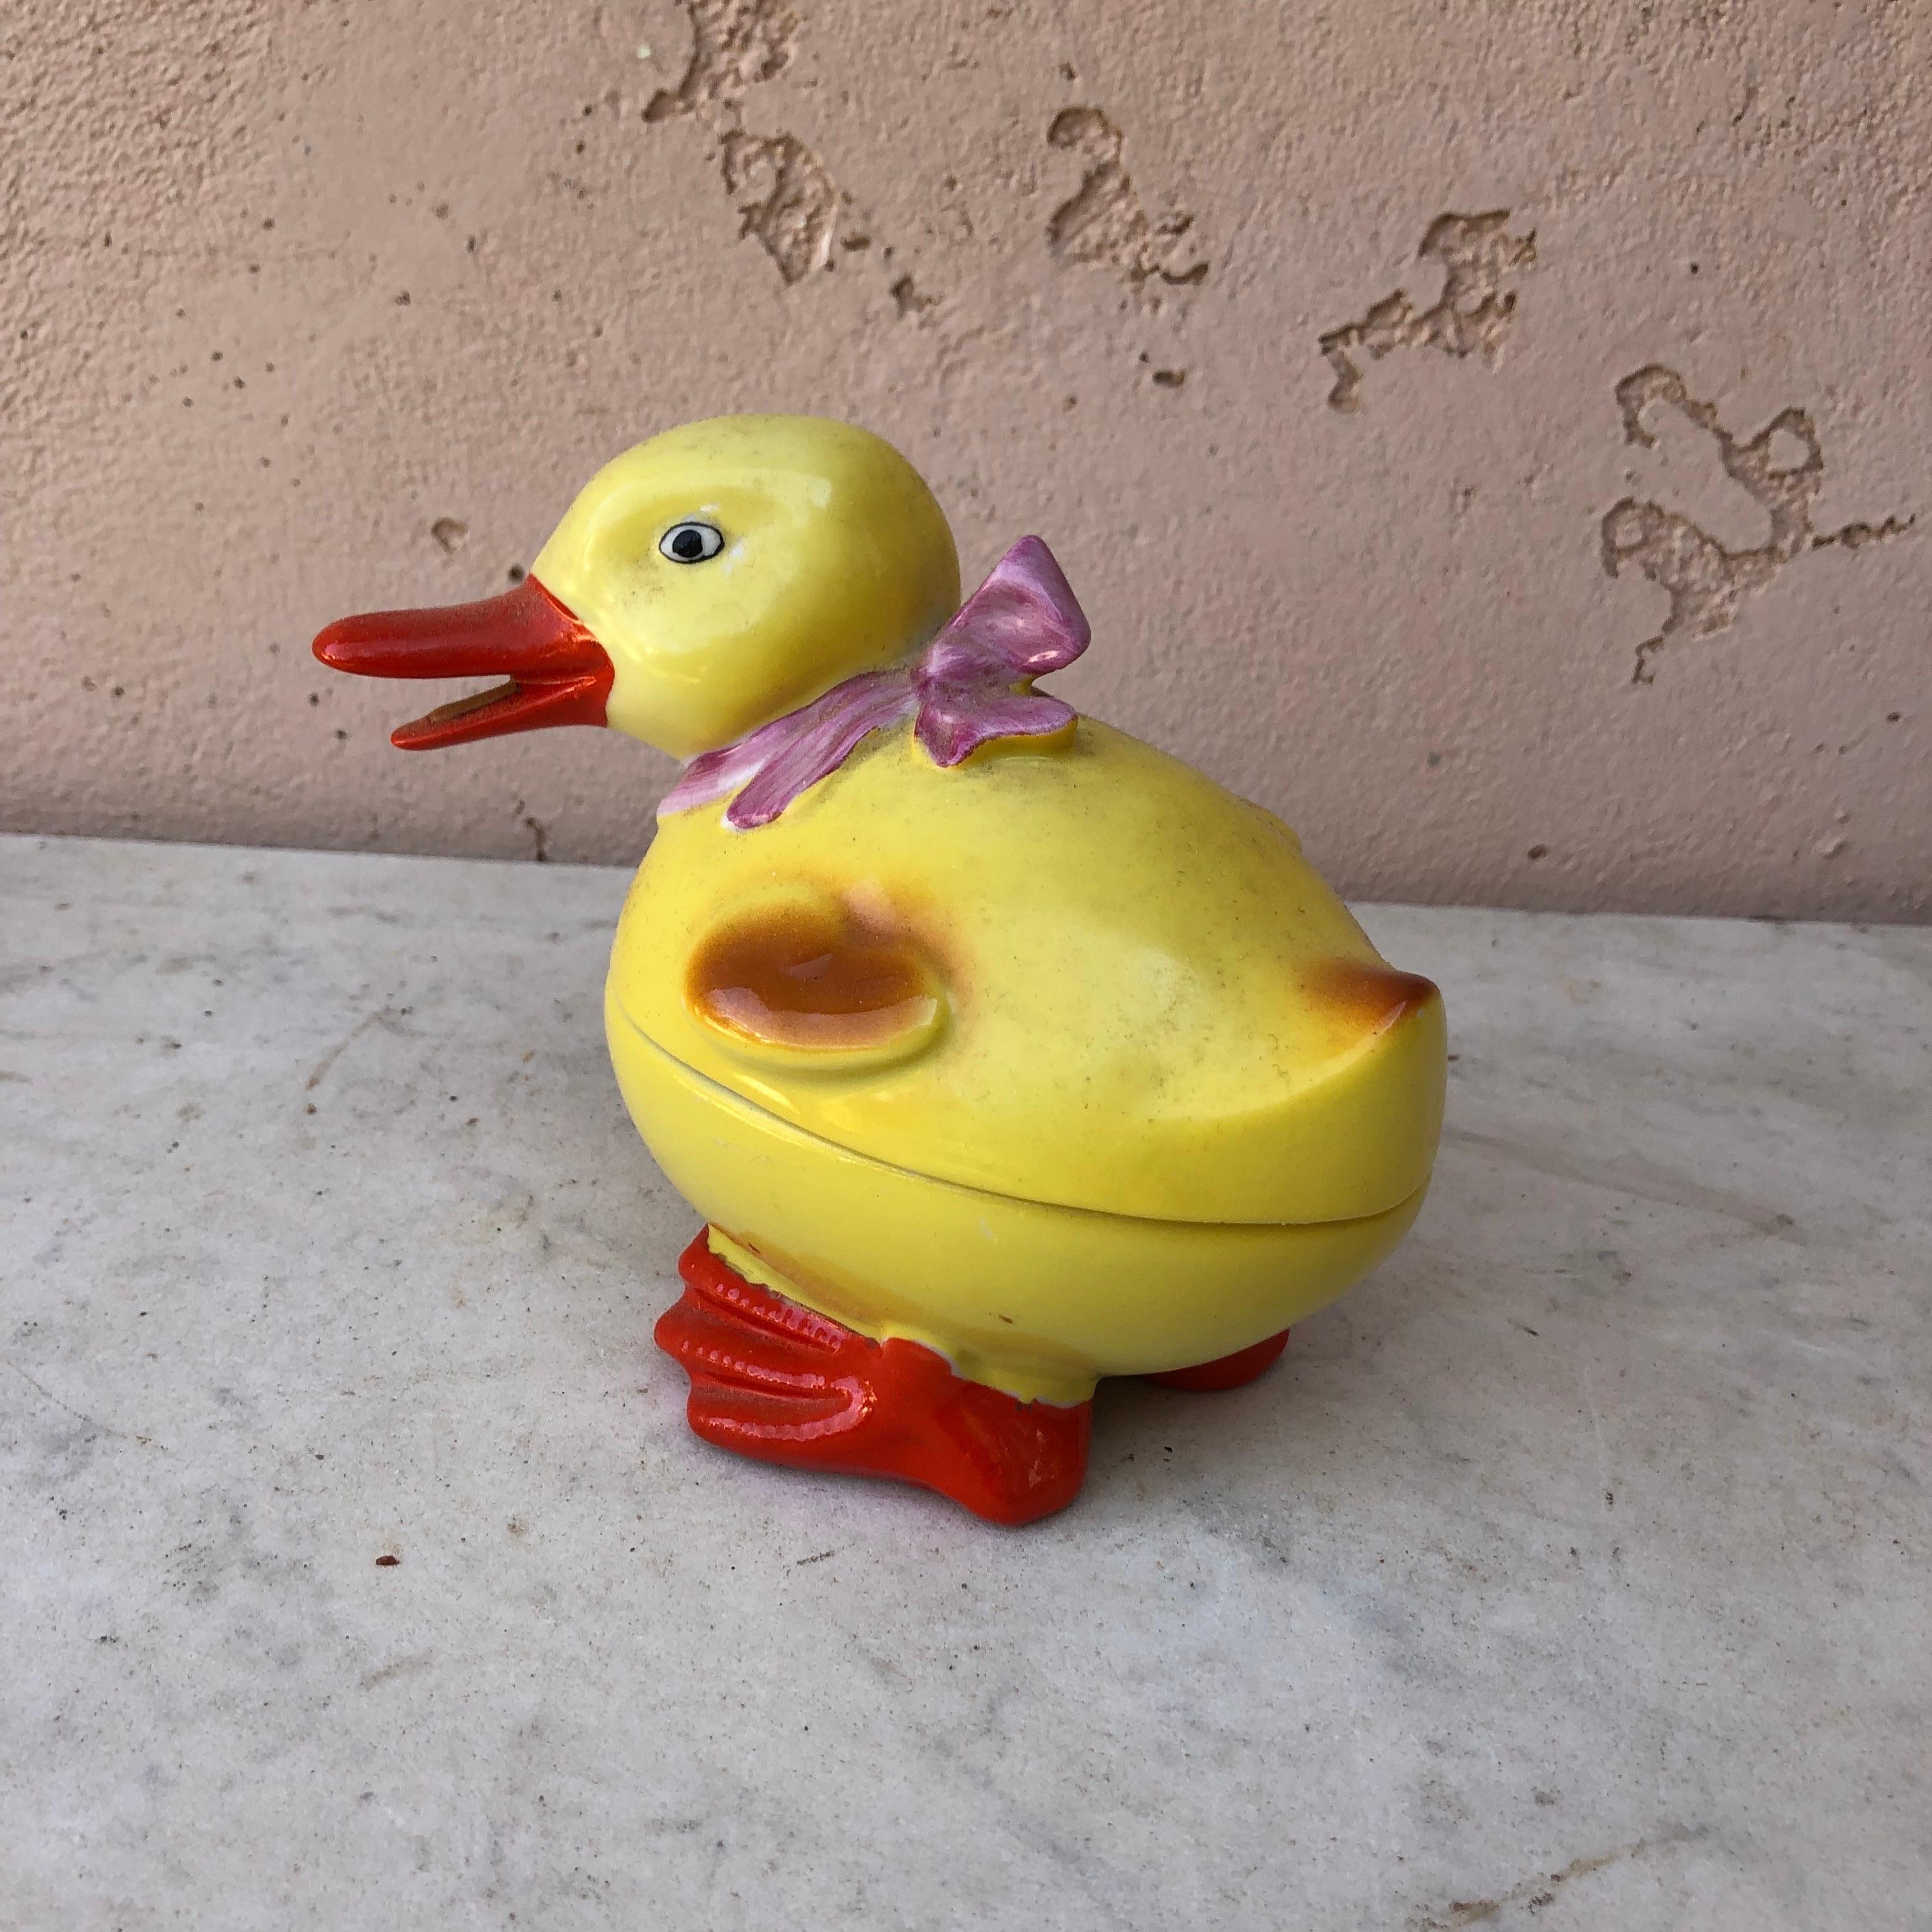 German porcelain duckling with bow box, Circa 1930.